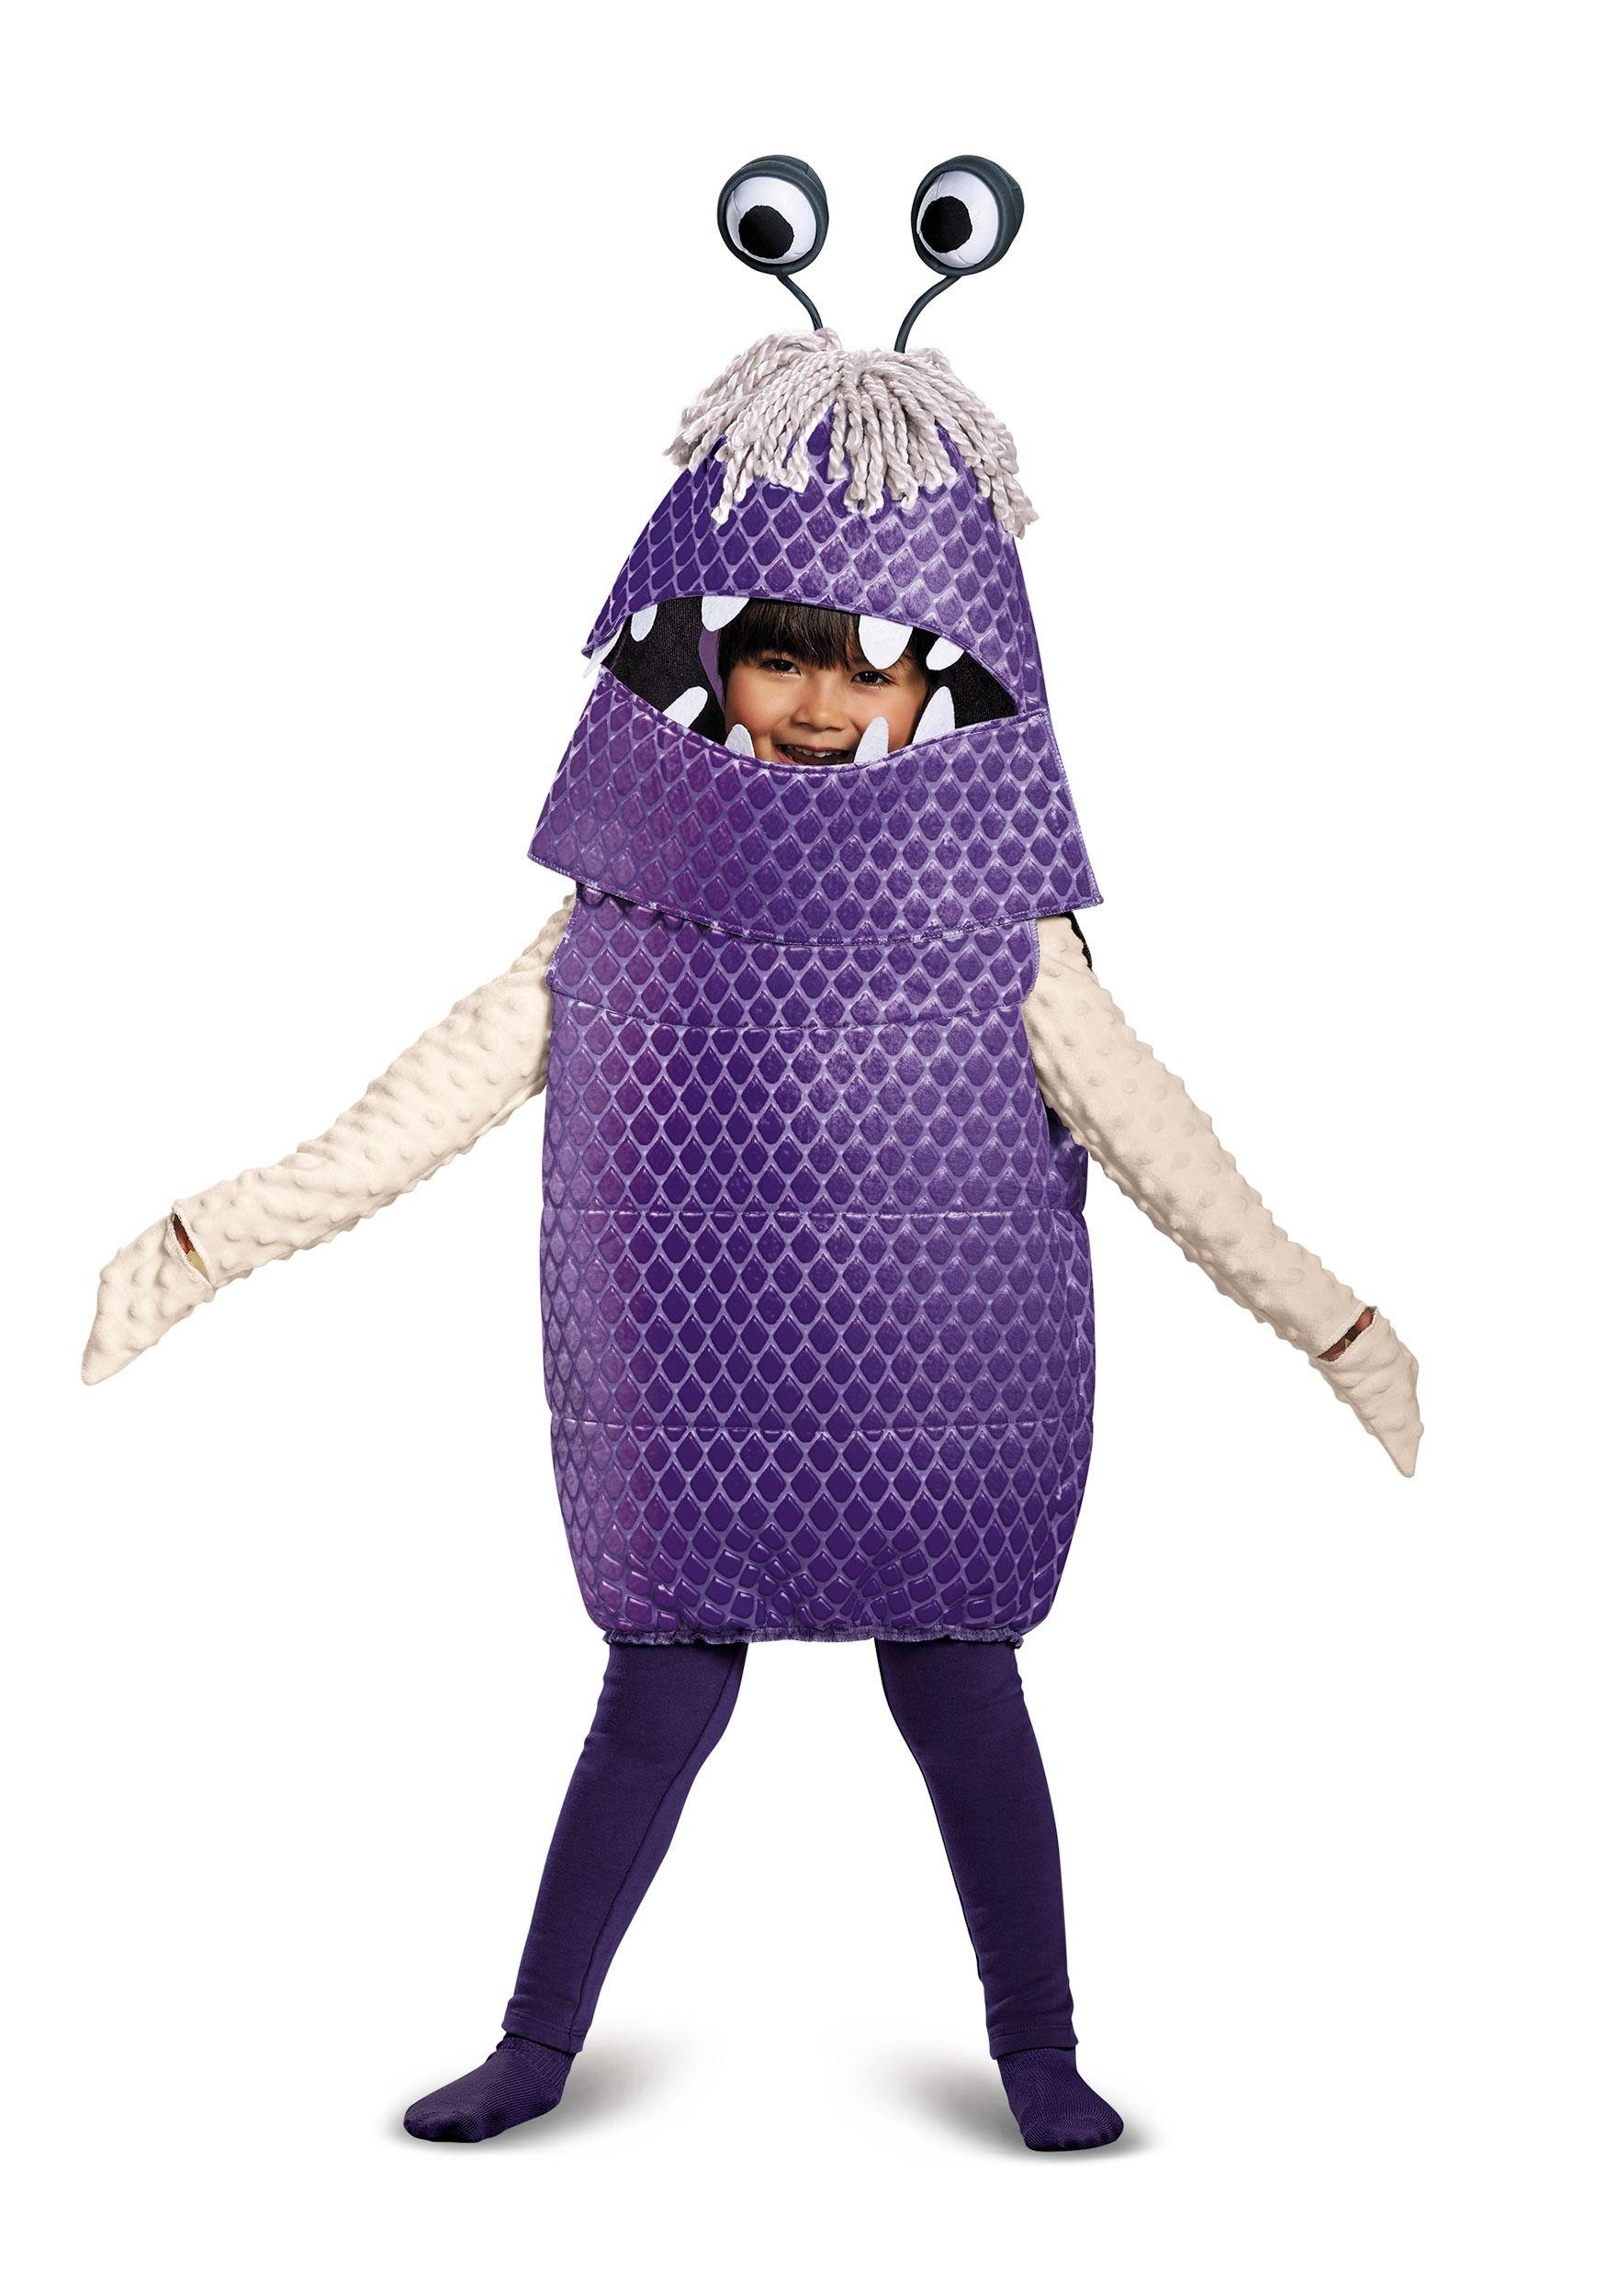 Boo Monsters Inc. Logo - Monsters Inc Boo Deluxe Toddler Costume